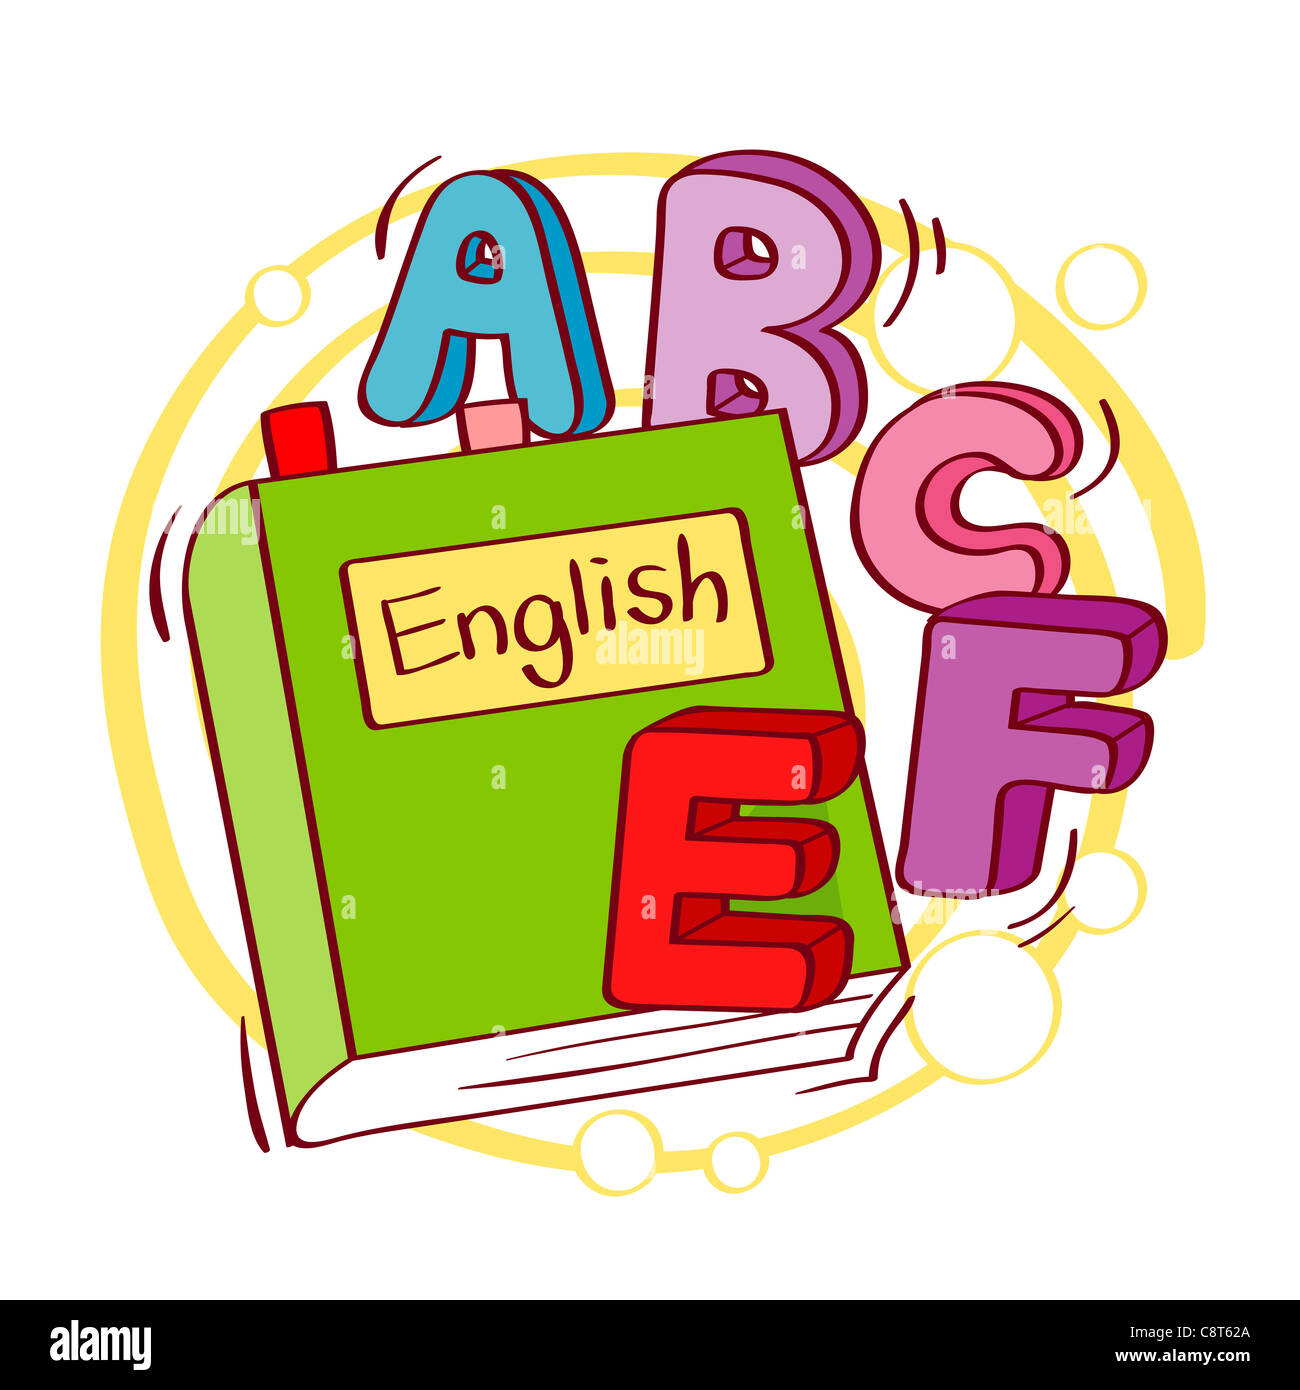 Illustration of book and alphabets Stock Photo